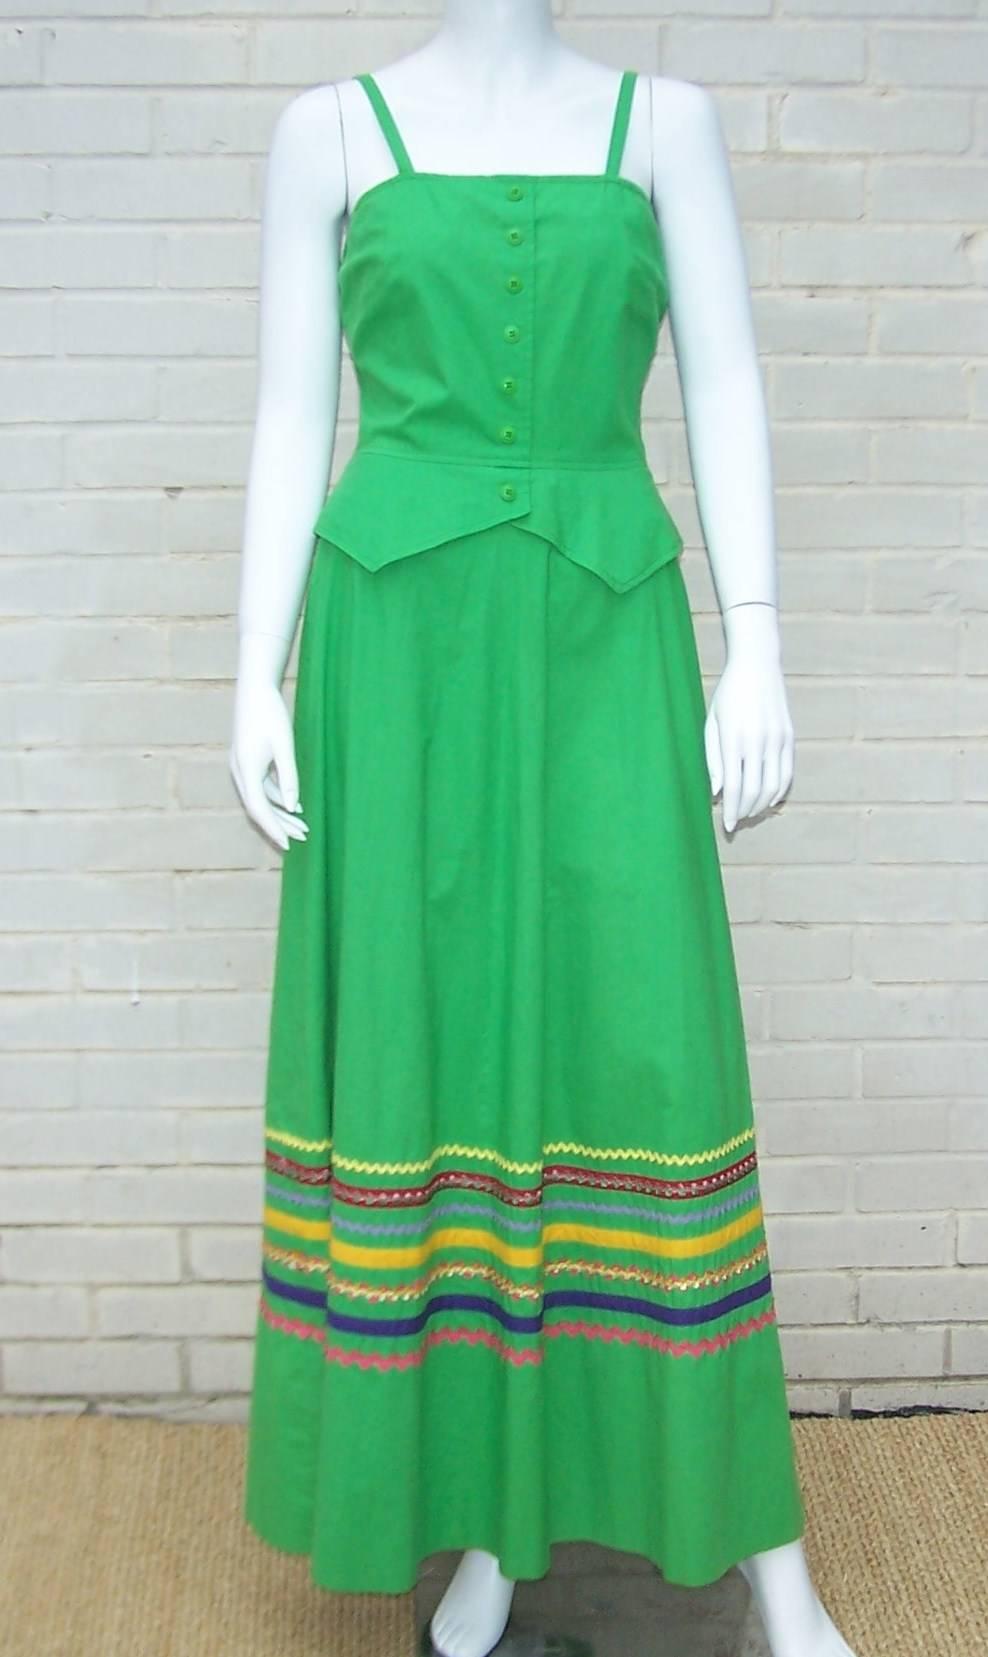 Add this 1970s cutie to your summer wardrobe for an easy sundress to wear for any occasion.  The vibrant green cotton is offset by colorful rick rack ribbon details and a faux peplum waistcoat style bodice.  The dress zips and hooks at the back and